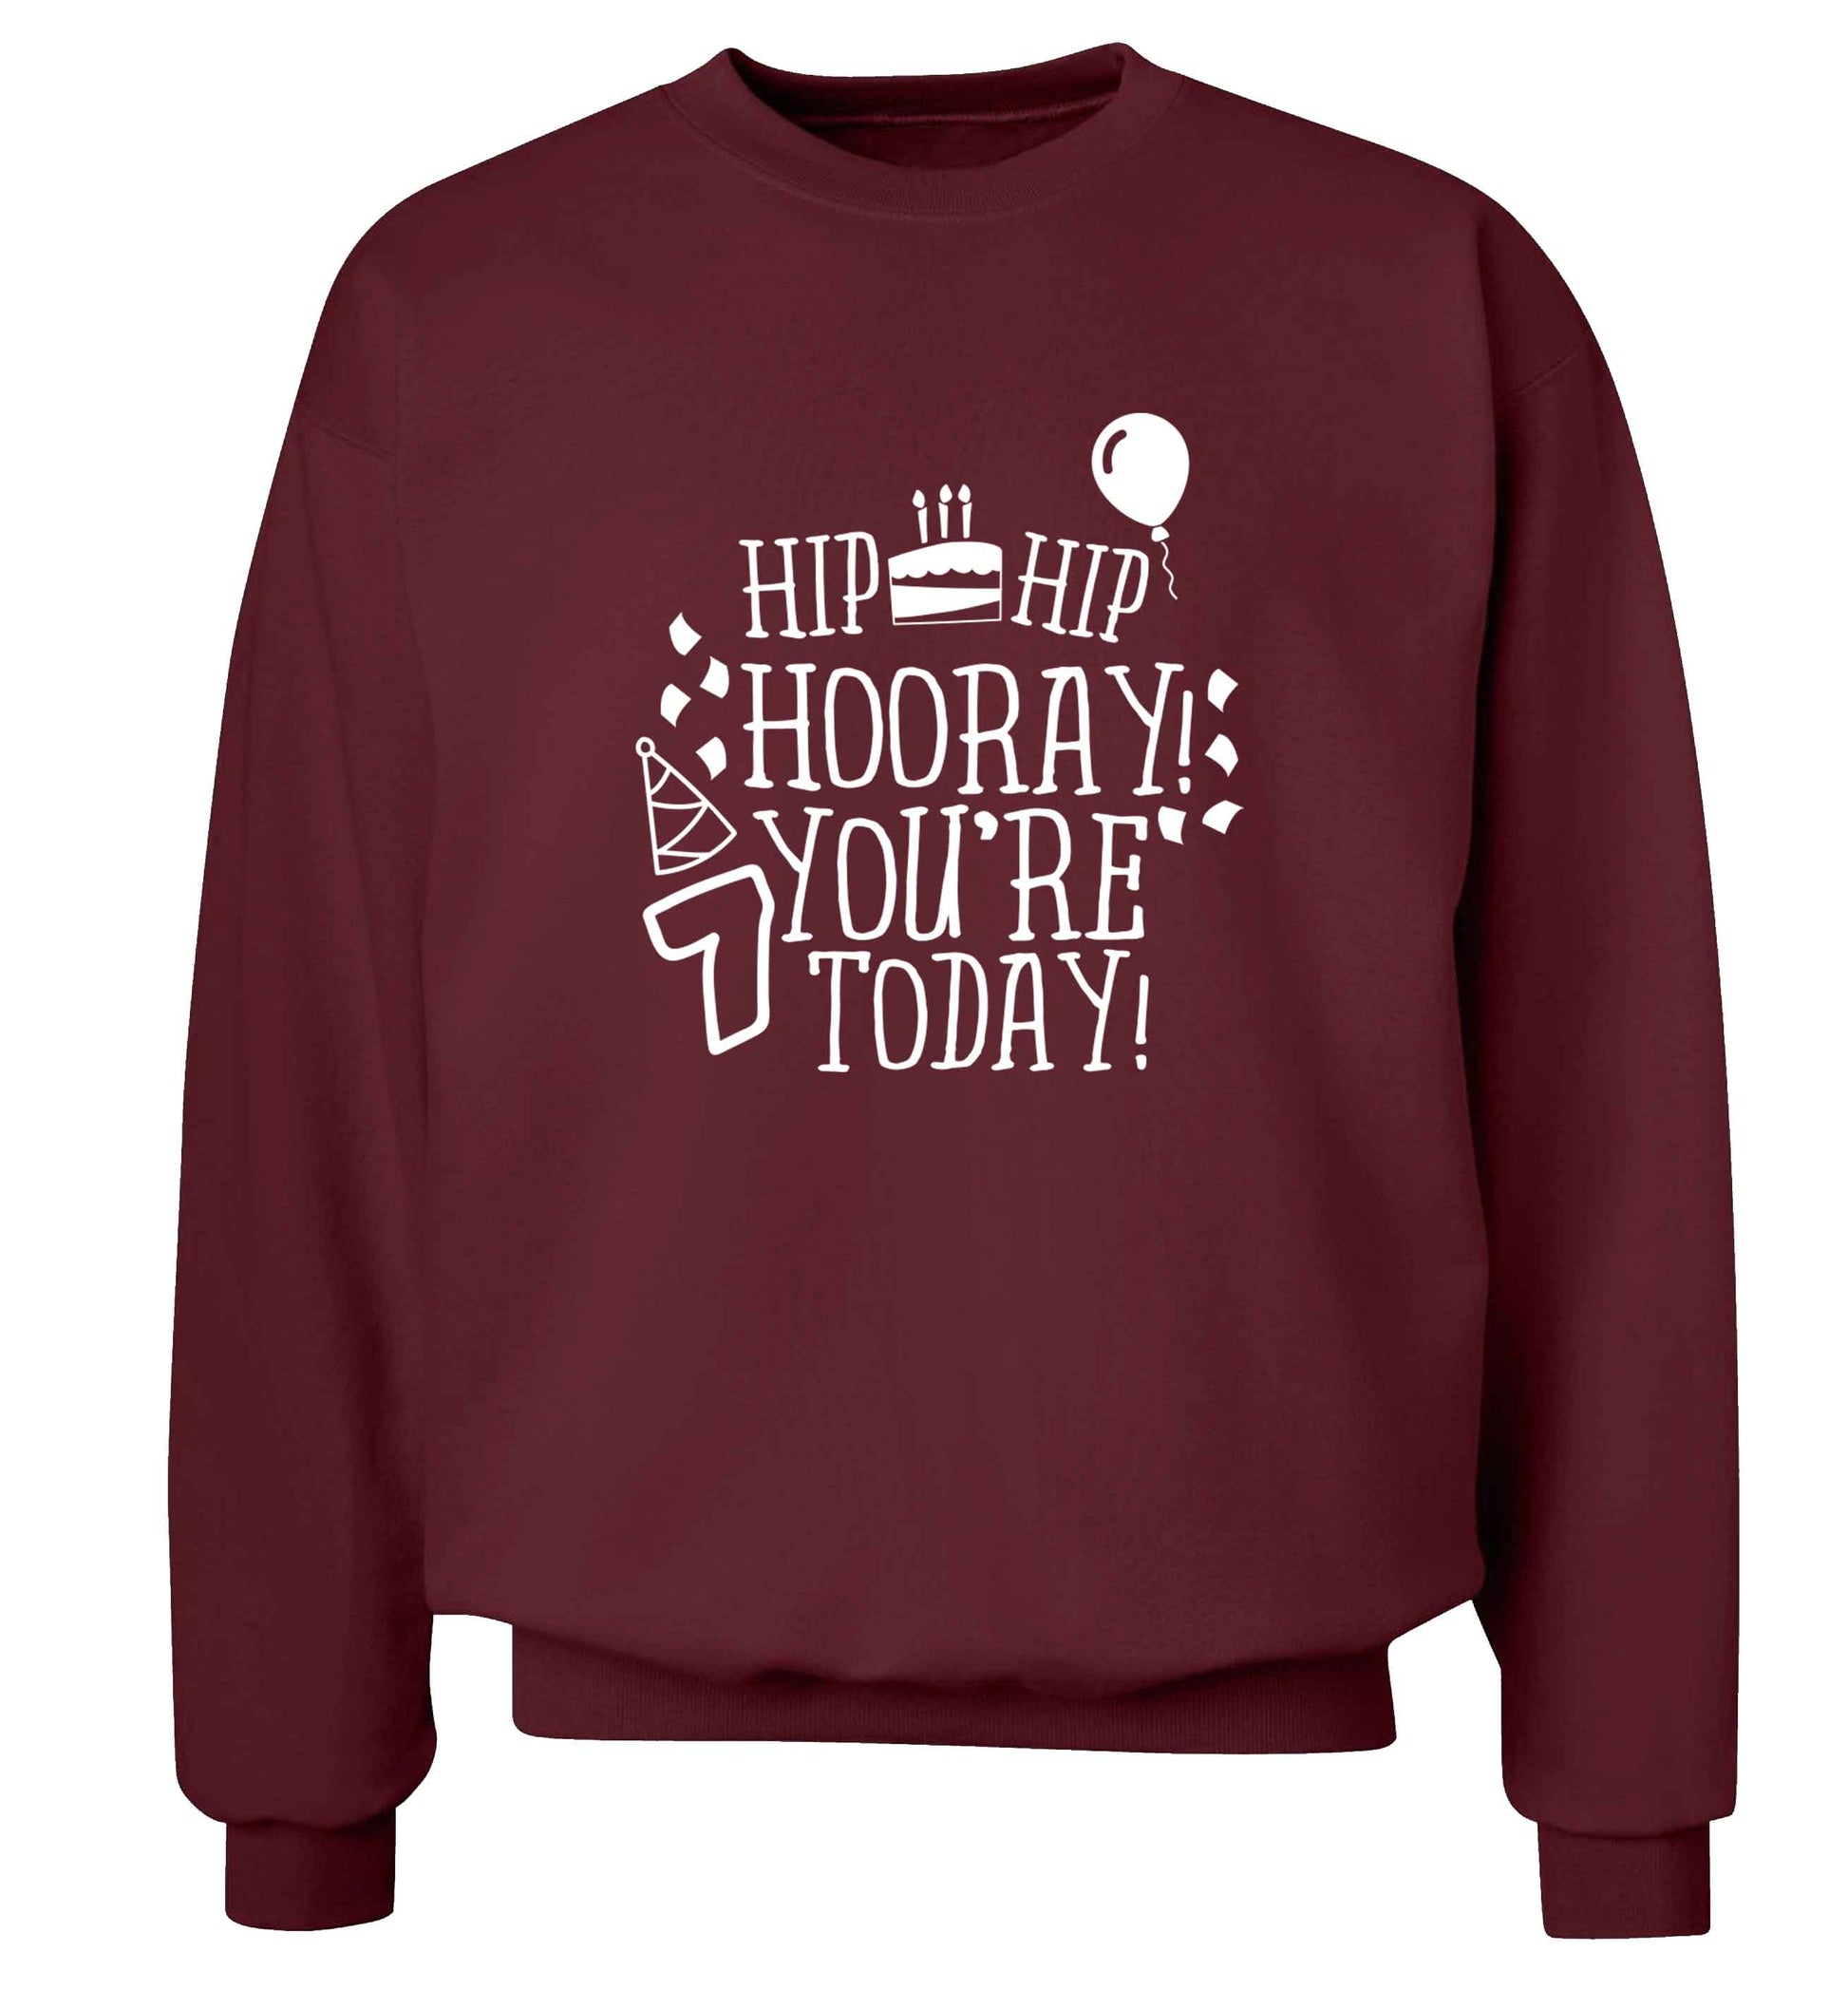 Hip hip hooray you're seven today! adult's unisex maroon sweater 2XL